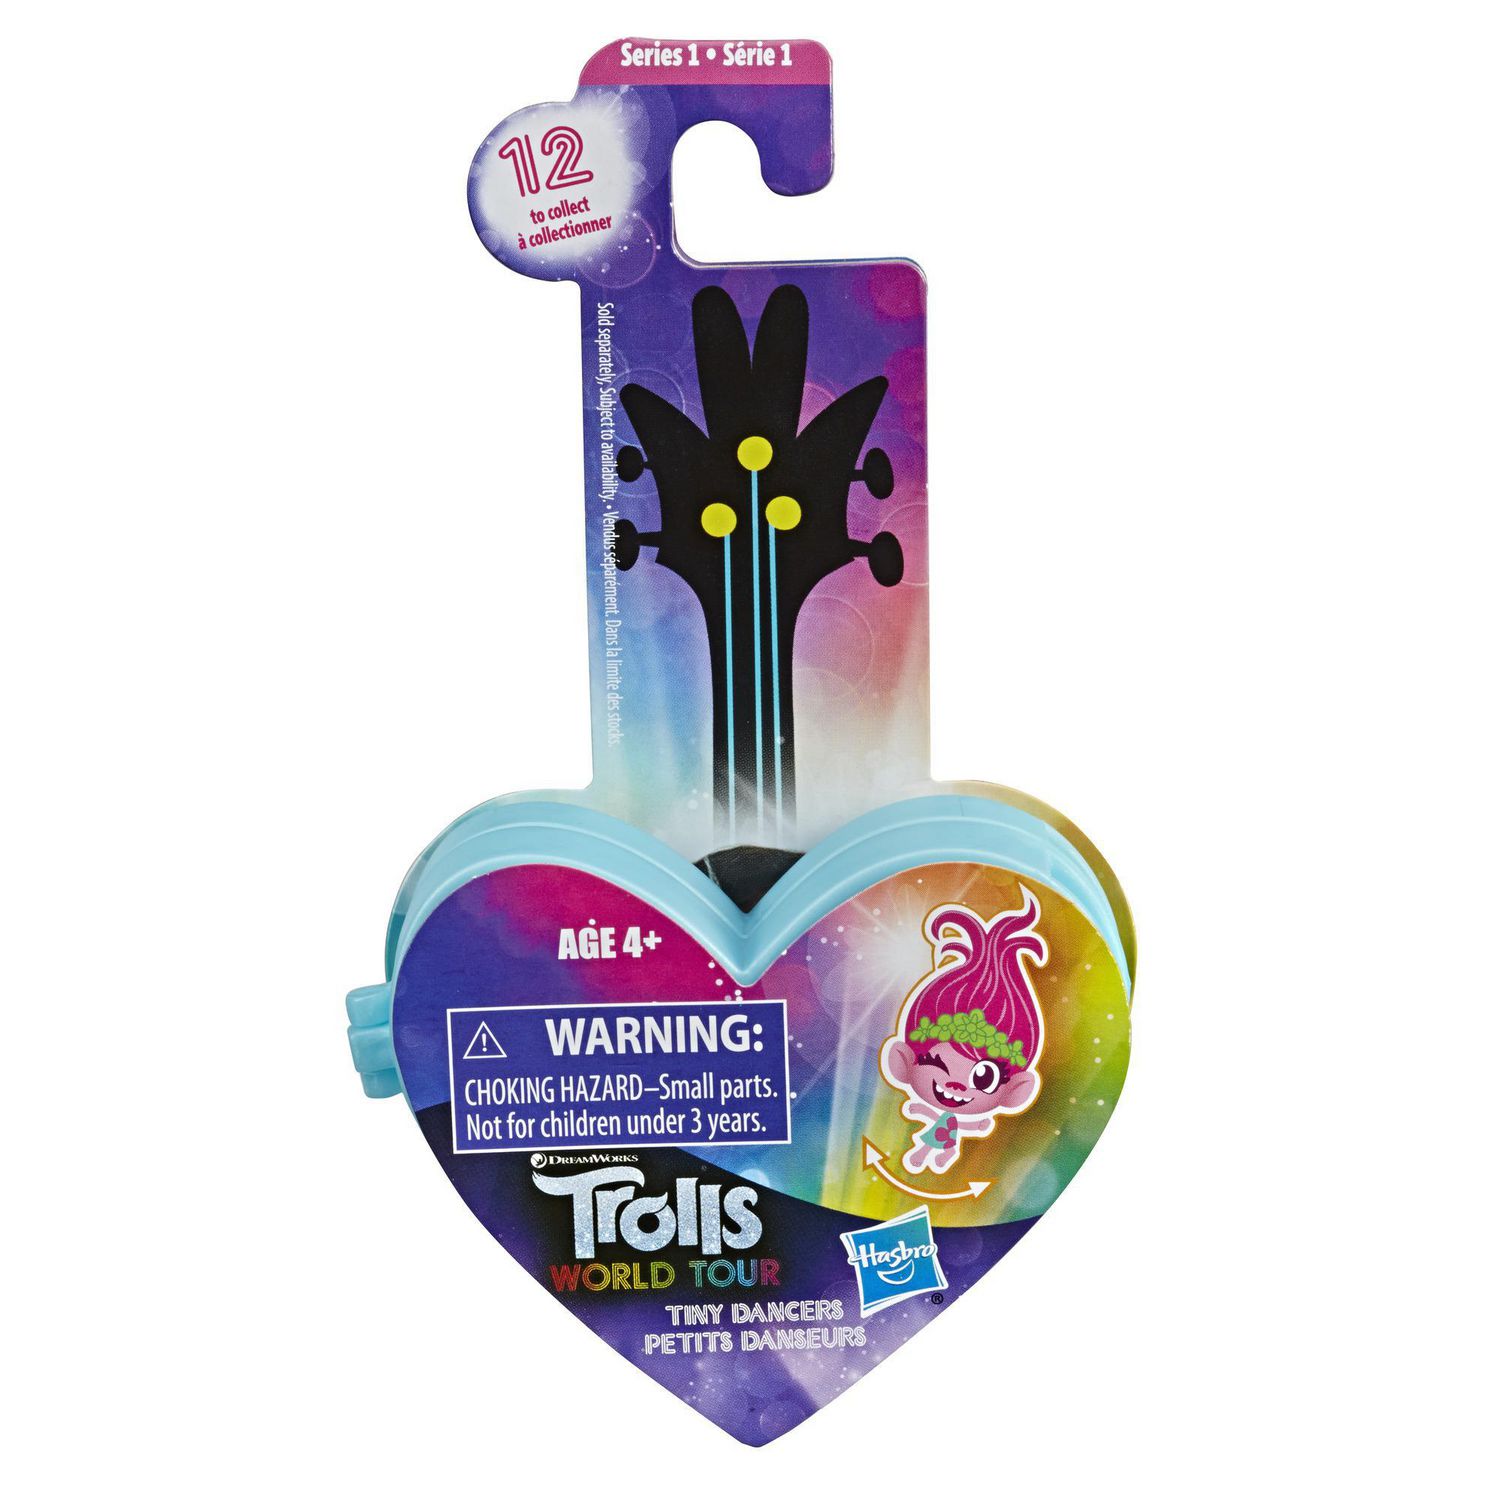 and More Necklace 2 Bracelets Toy Inspired by Trolls World Tour DreamWorks Trolls Tiny Dancers Greatest Hits 6 Collector Figures